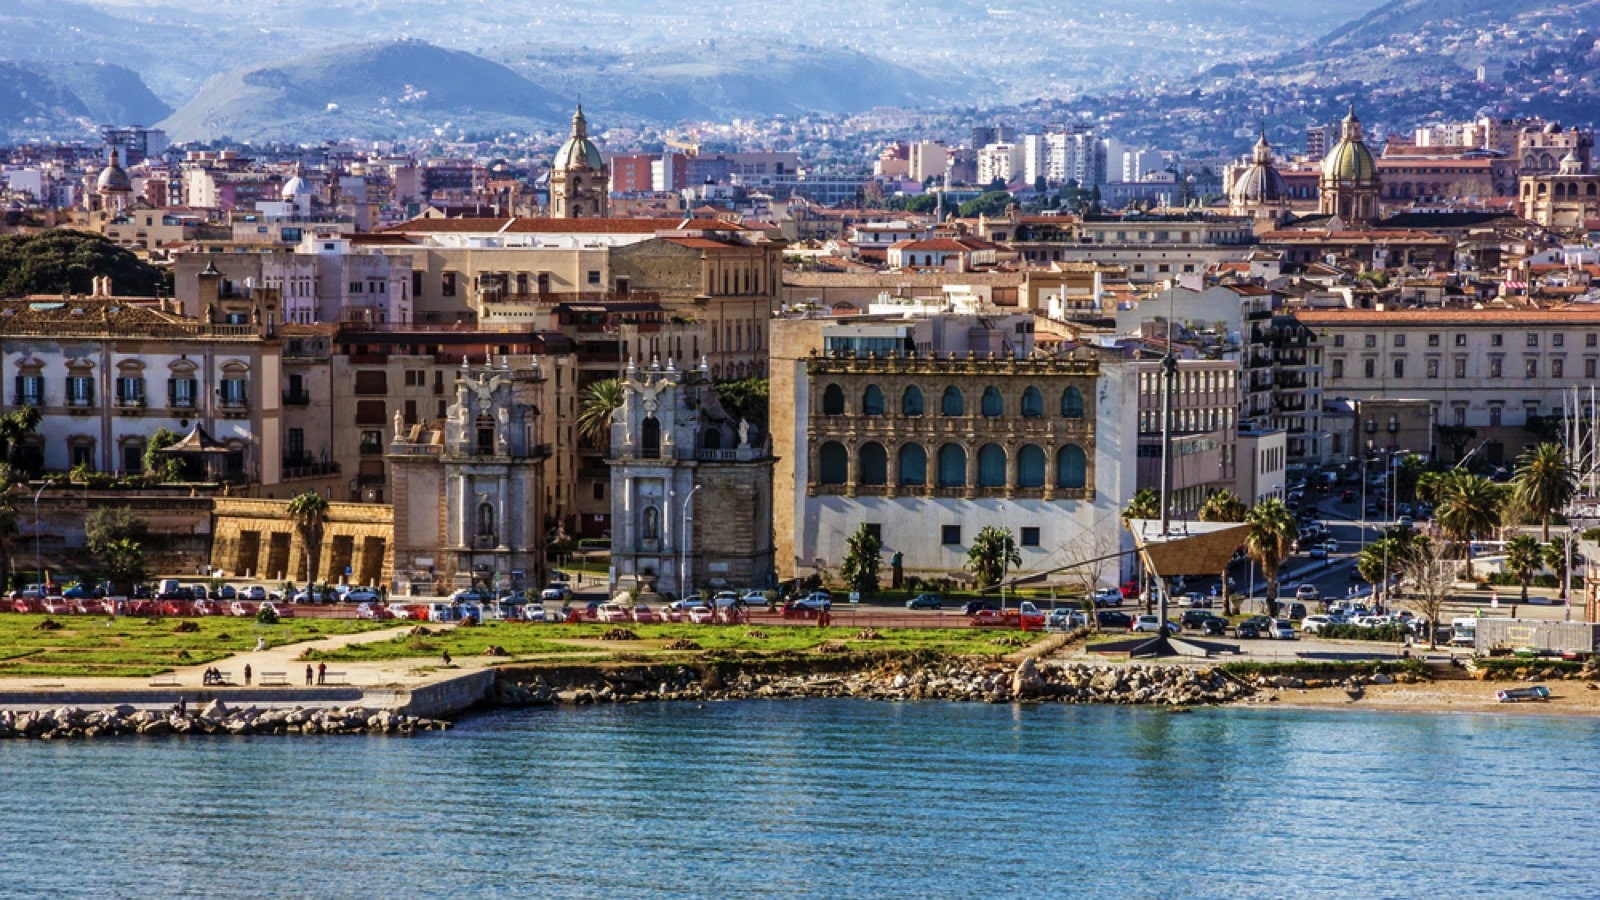 <p>Sitting on some of the world's oldest rocks, the warm Sirocco wind that blows in from Africa makes winter in Palermo warm and mild. Someone described it as the place to savor unreal street food before a near-endless spread of turquoise sea waters every day, all year.</p>